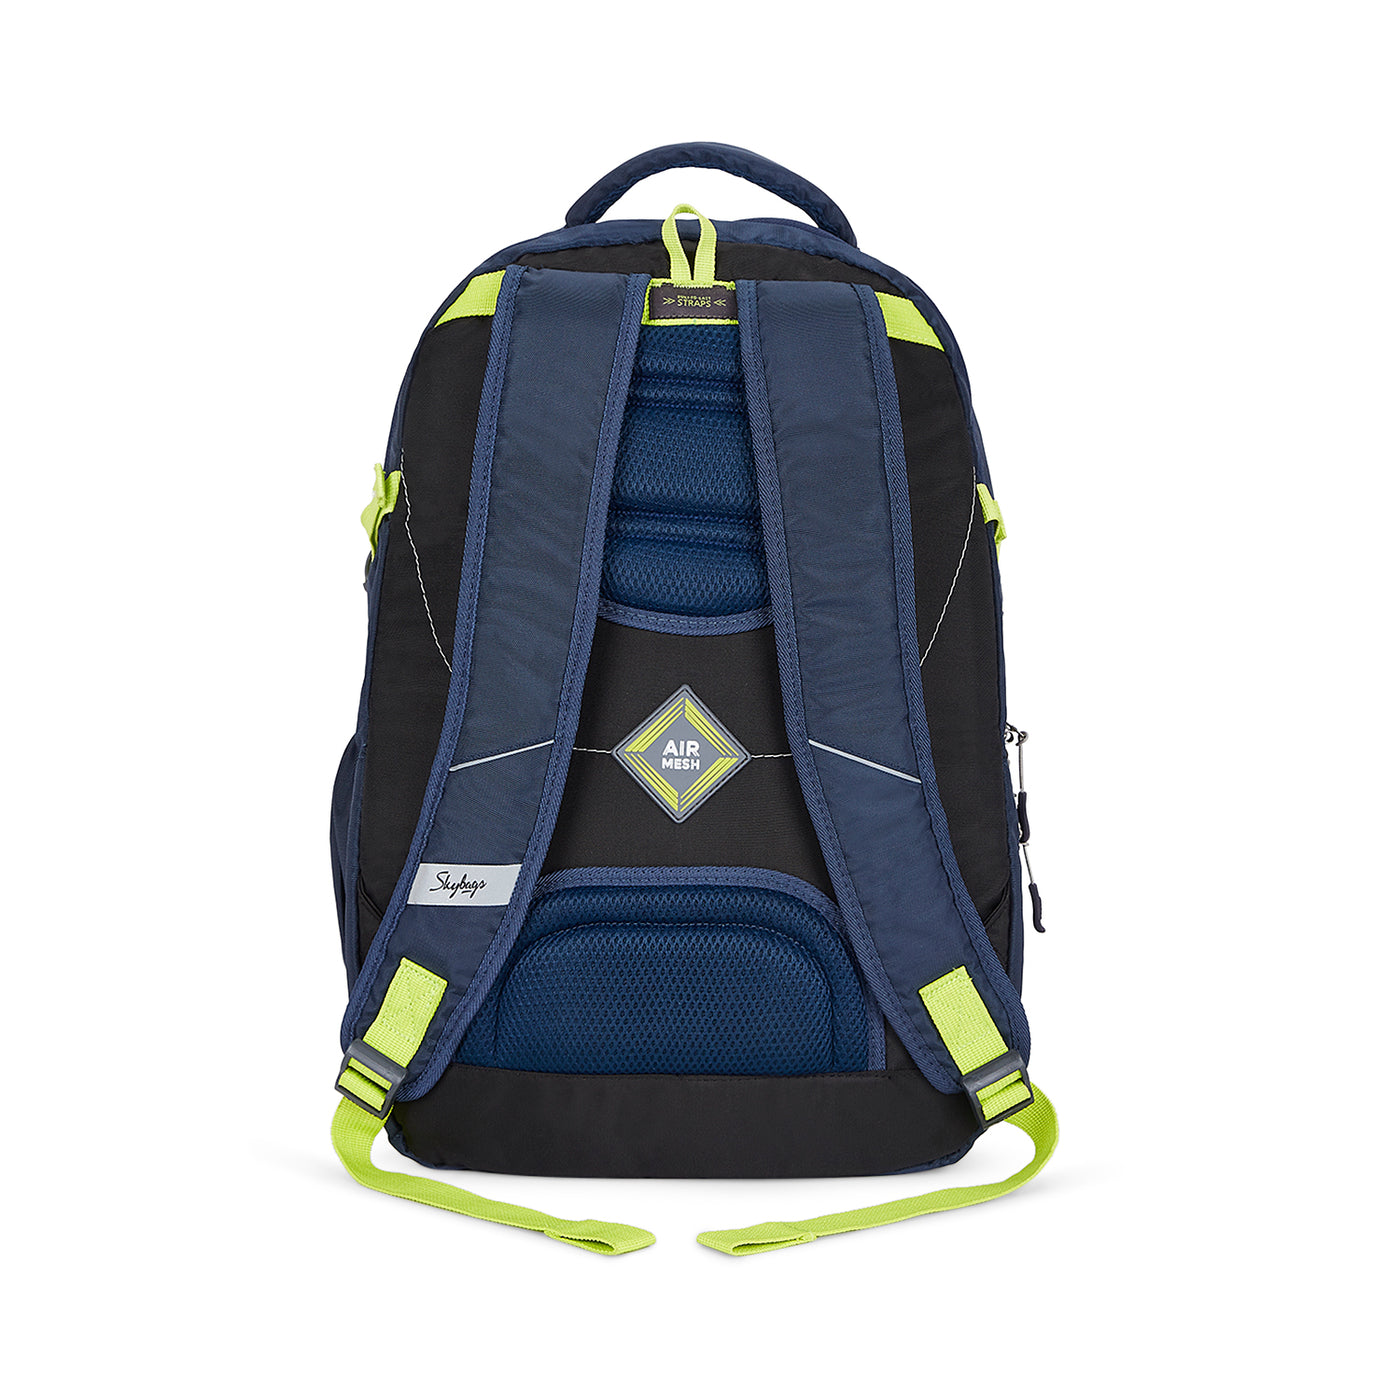 Skybags Xylo Plus 04 